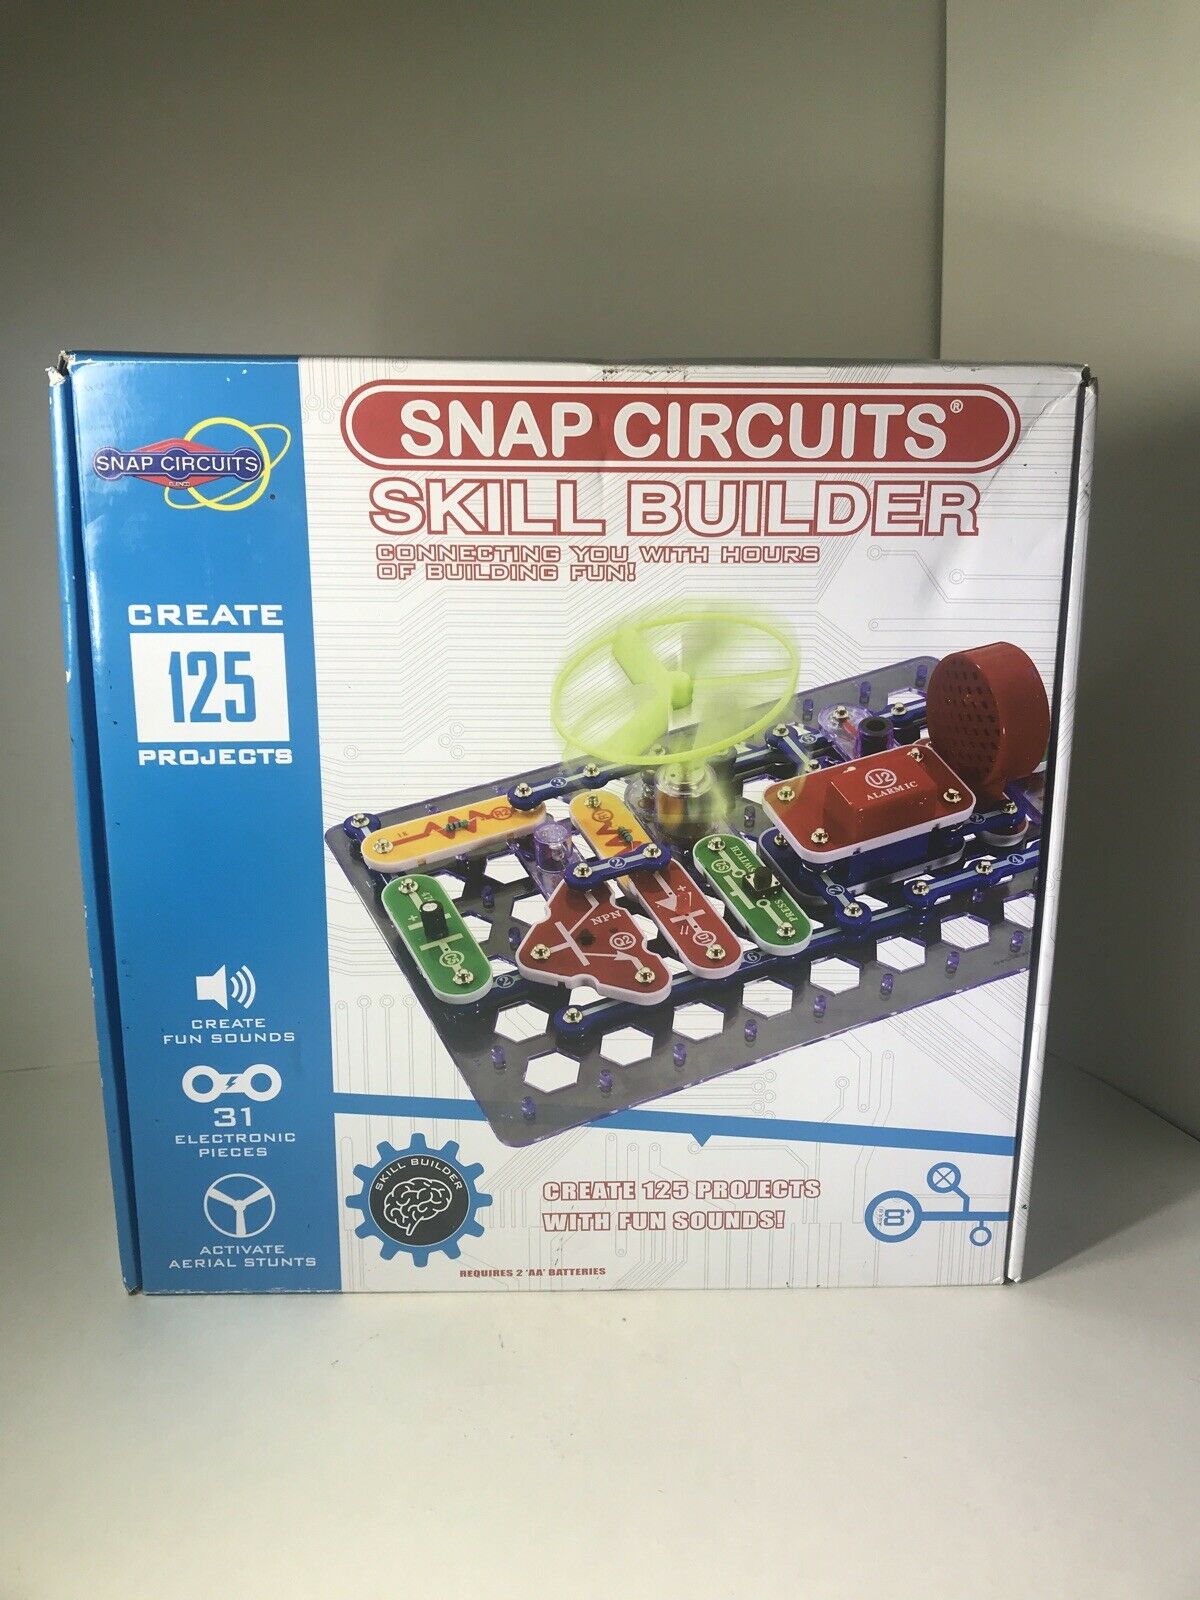 Snap Circuits Skill Builder Create 125 Projects See Description